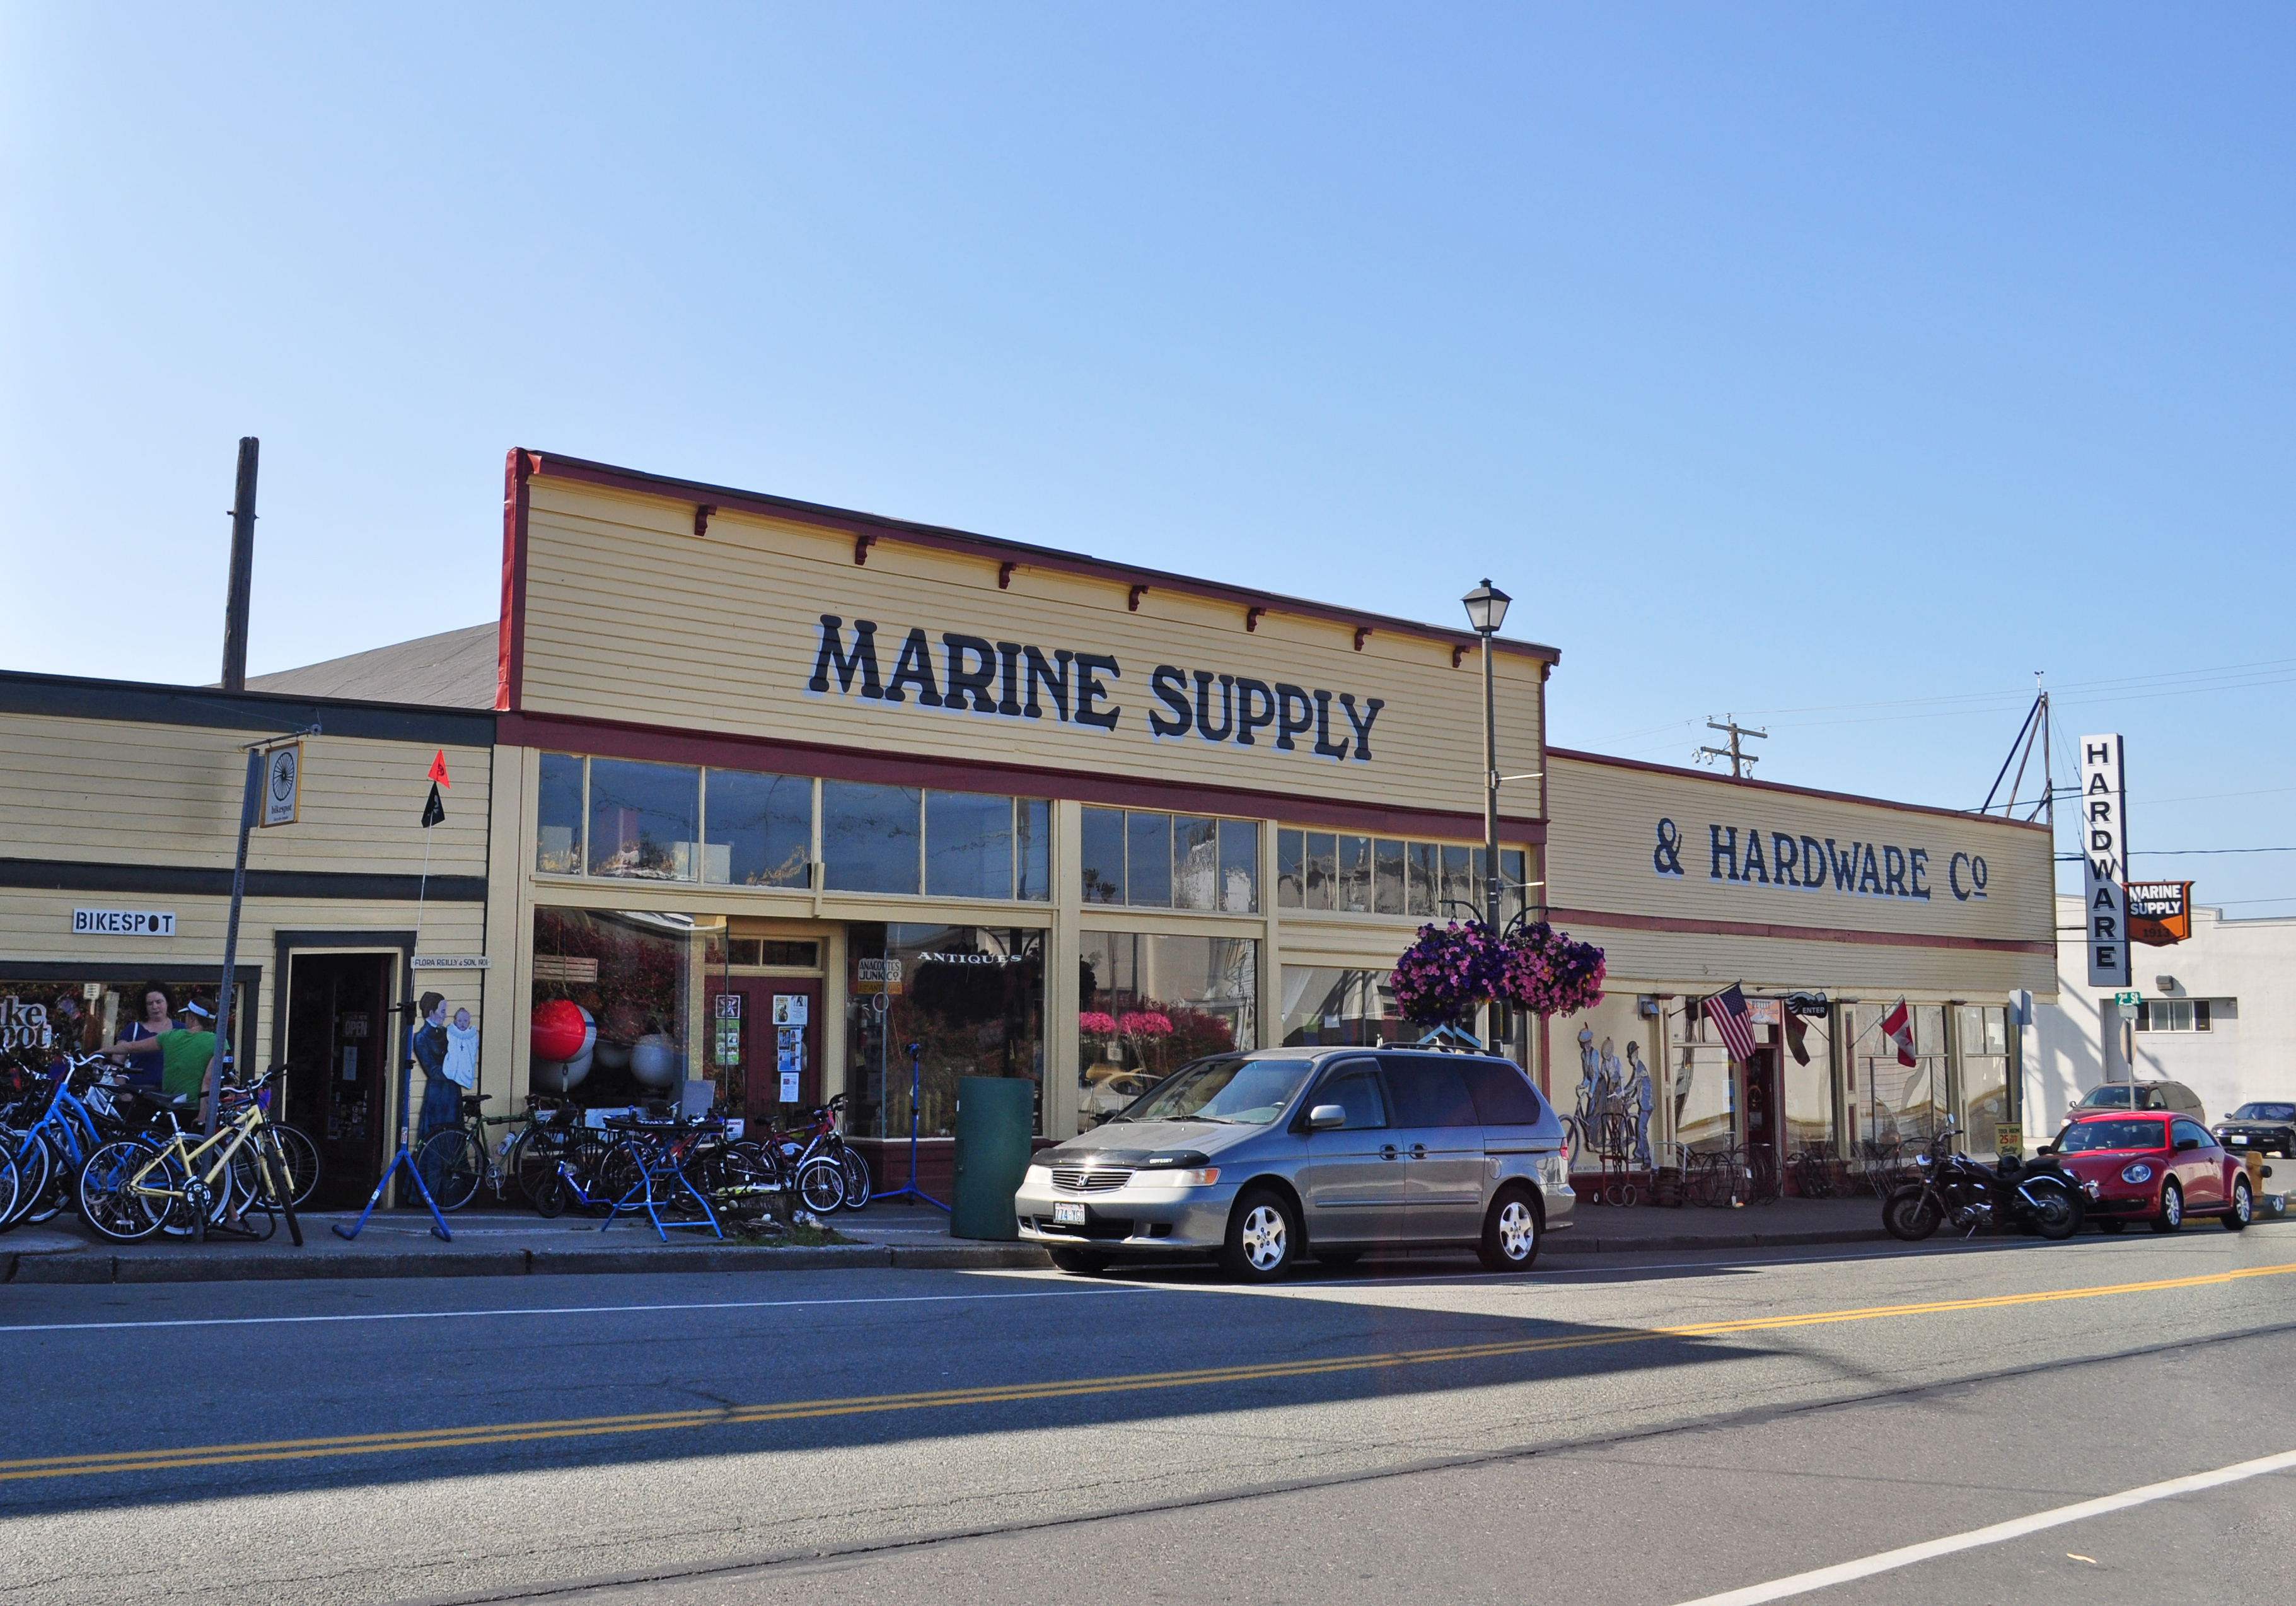 Friends of Marine Supply and Hardware received building assessment services for the 1910 Marine Supply & Hardware Building. The Port of Anacortes recently acquired the National Register-listed building and an assessment will help understand the potential for future use compatible with its historic designation.